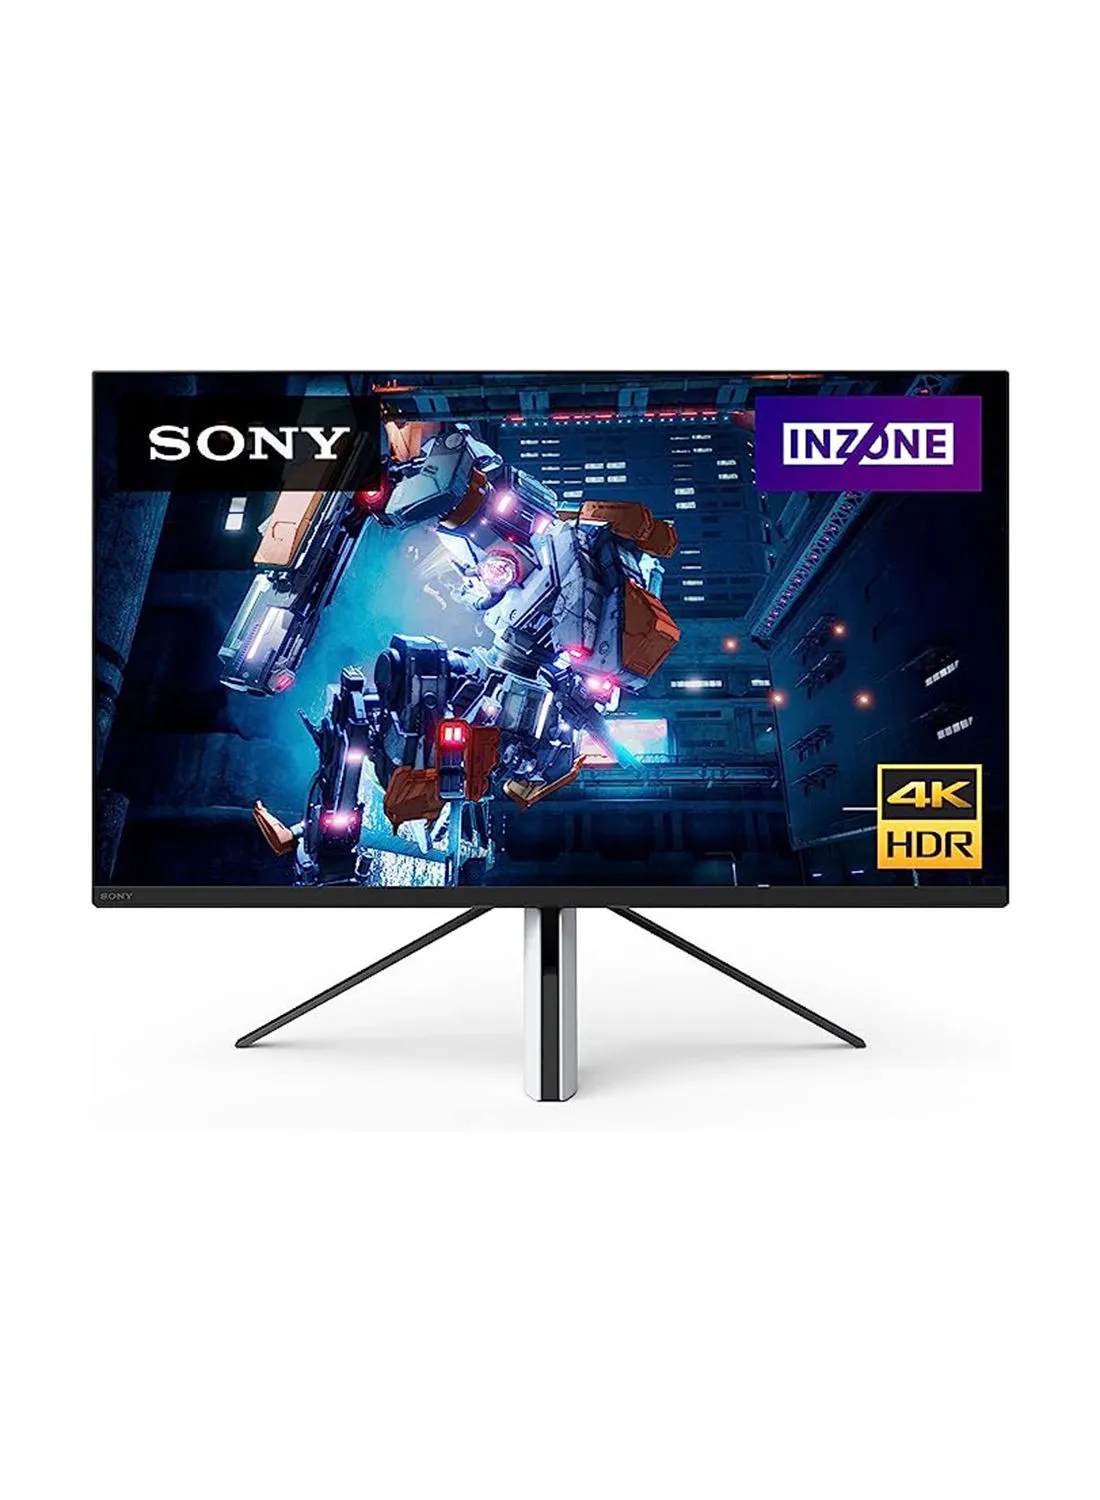 Sony 27 Inch InZone M9 4K HDR 144Hz Gaming Monitor With Full Array Local Dimming And NVIDIA G-SYNC White